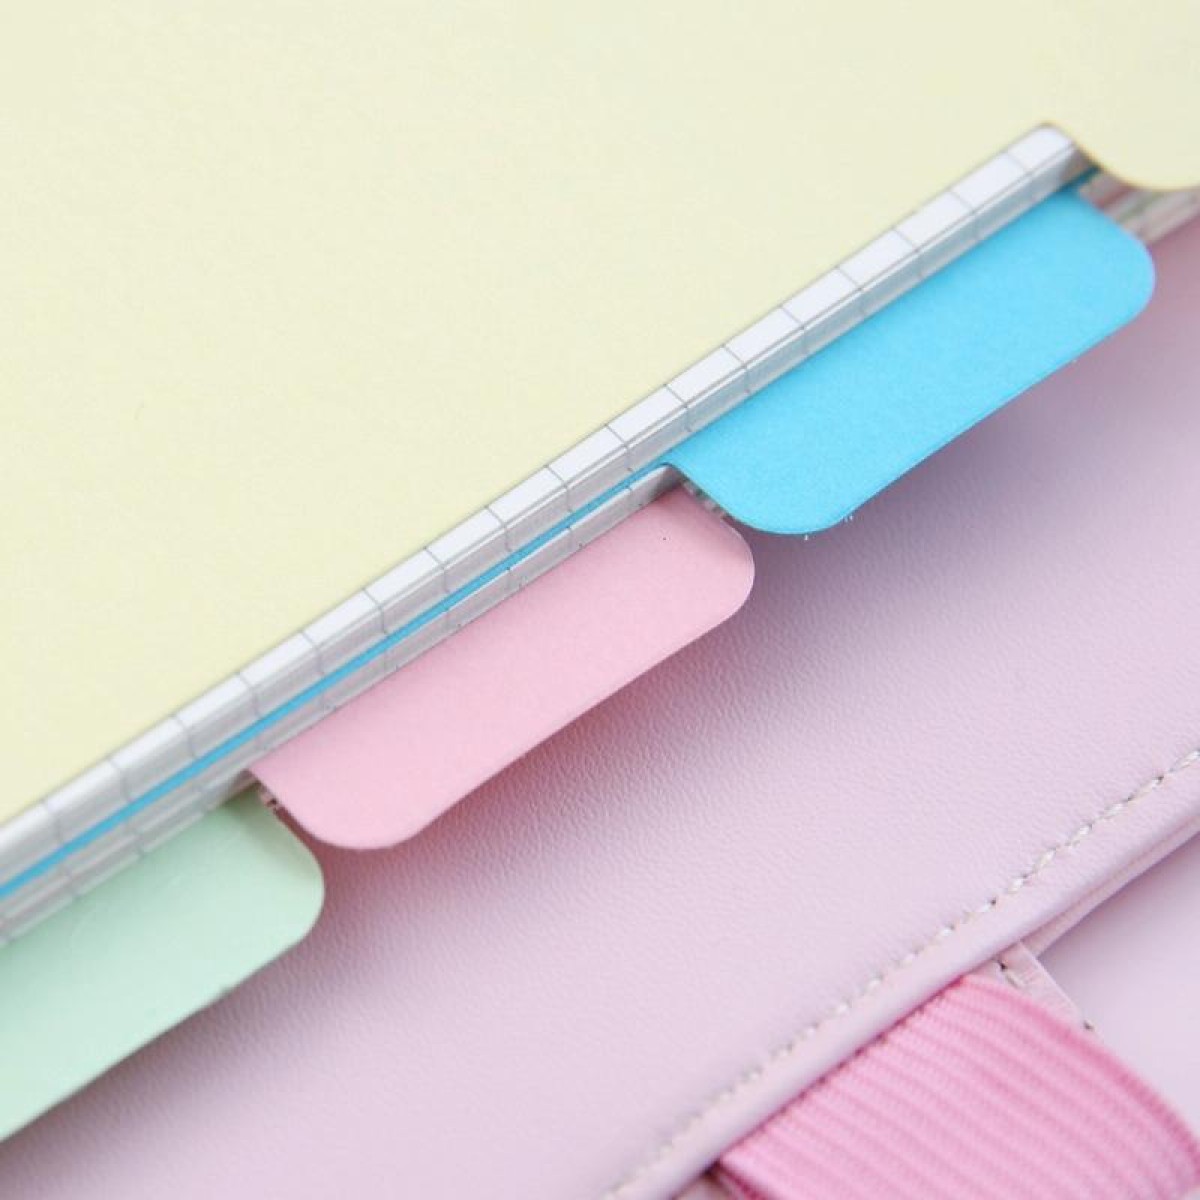 10 Packs A6 Loose-Leaf Index Handbook Divider Page Notebook 6-Hole Inner Core Index Page Random Colour Delivery